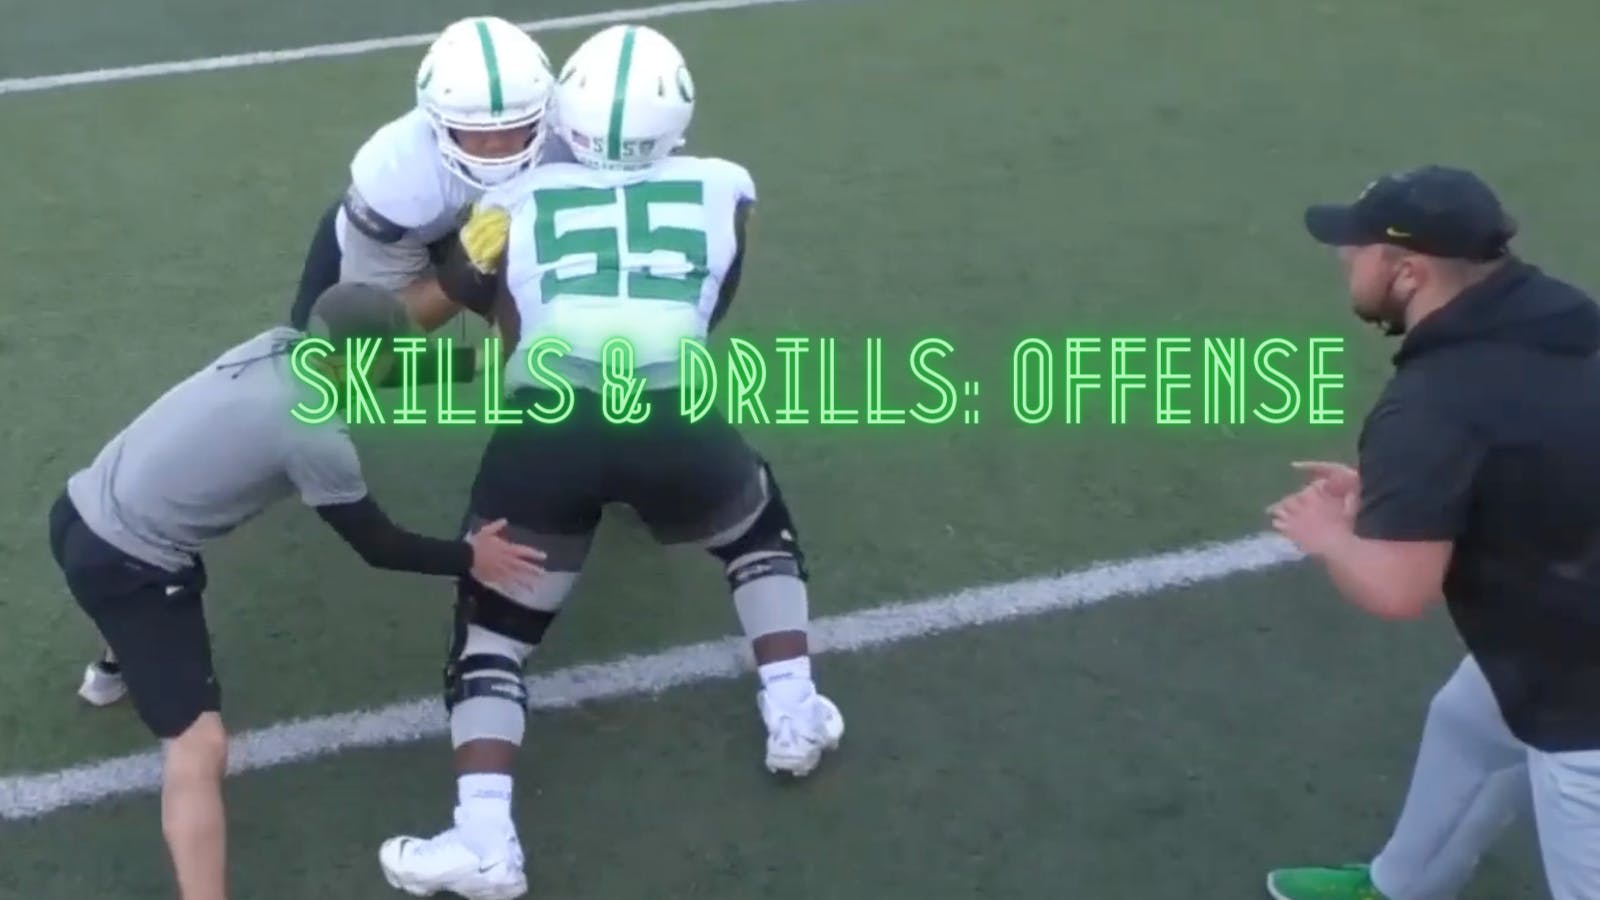 Offensive Drills of the Week